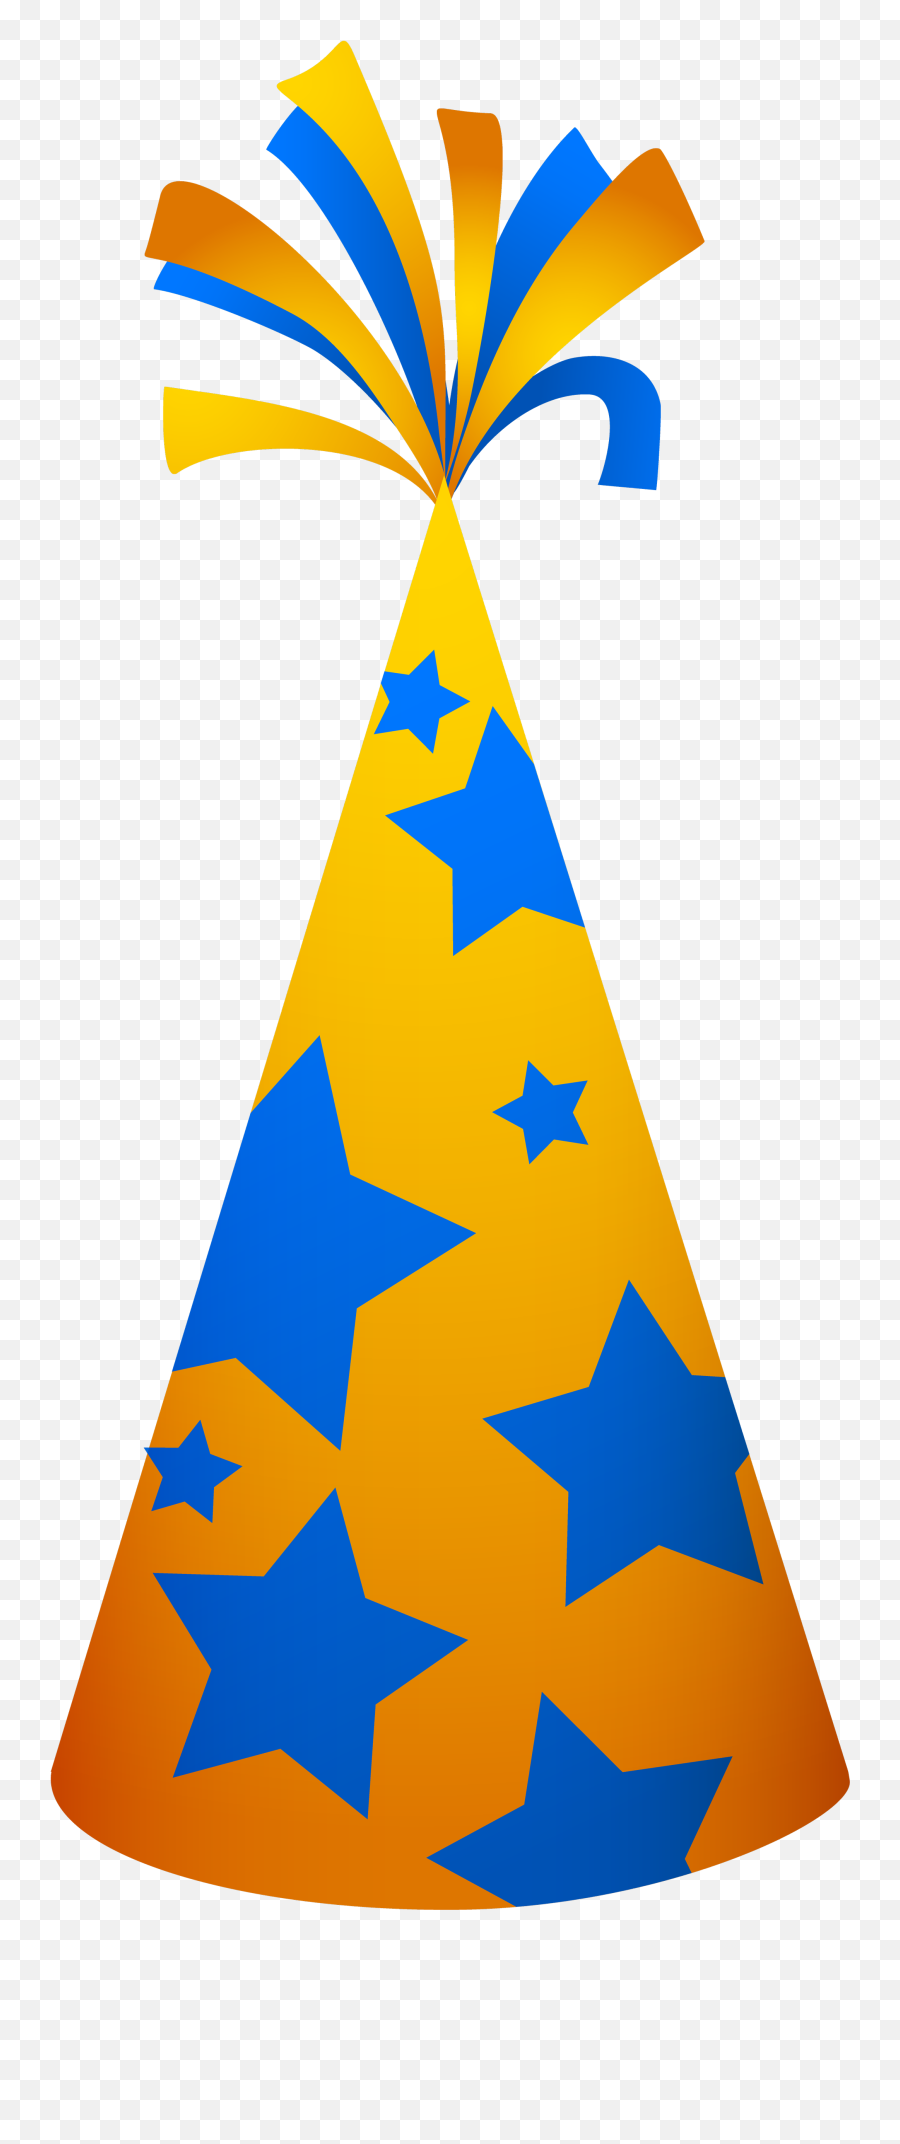 Party Hat Png Image - Transparent Party Hat Vector Emoji,Party Hat Png